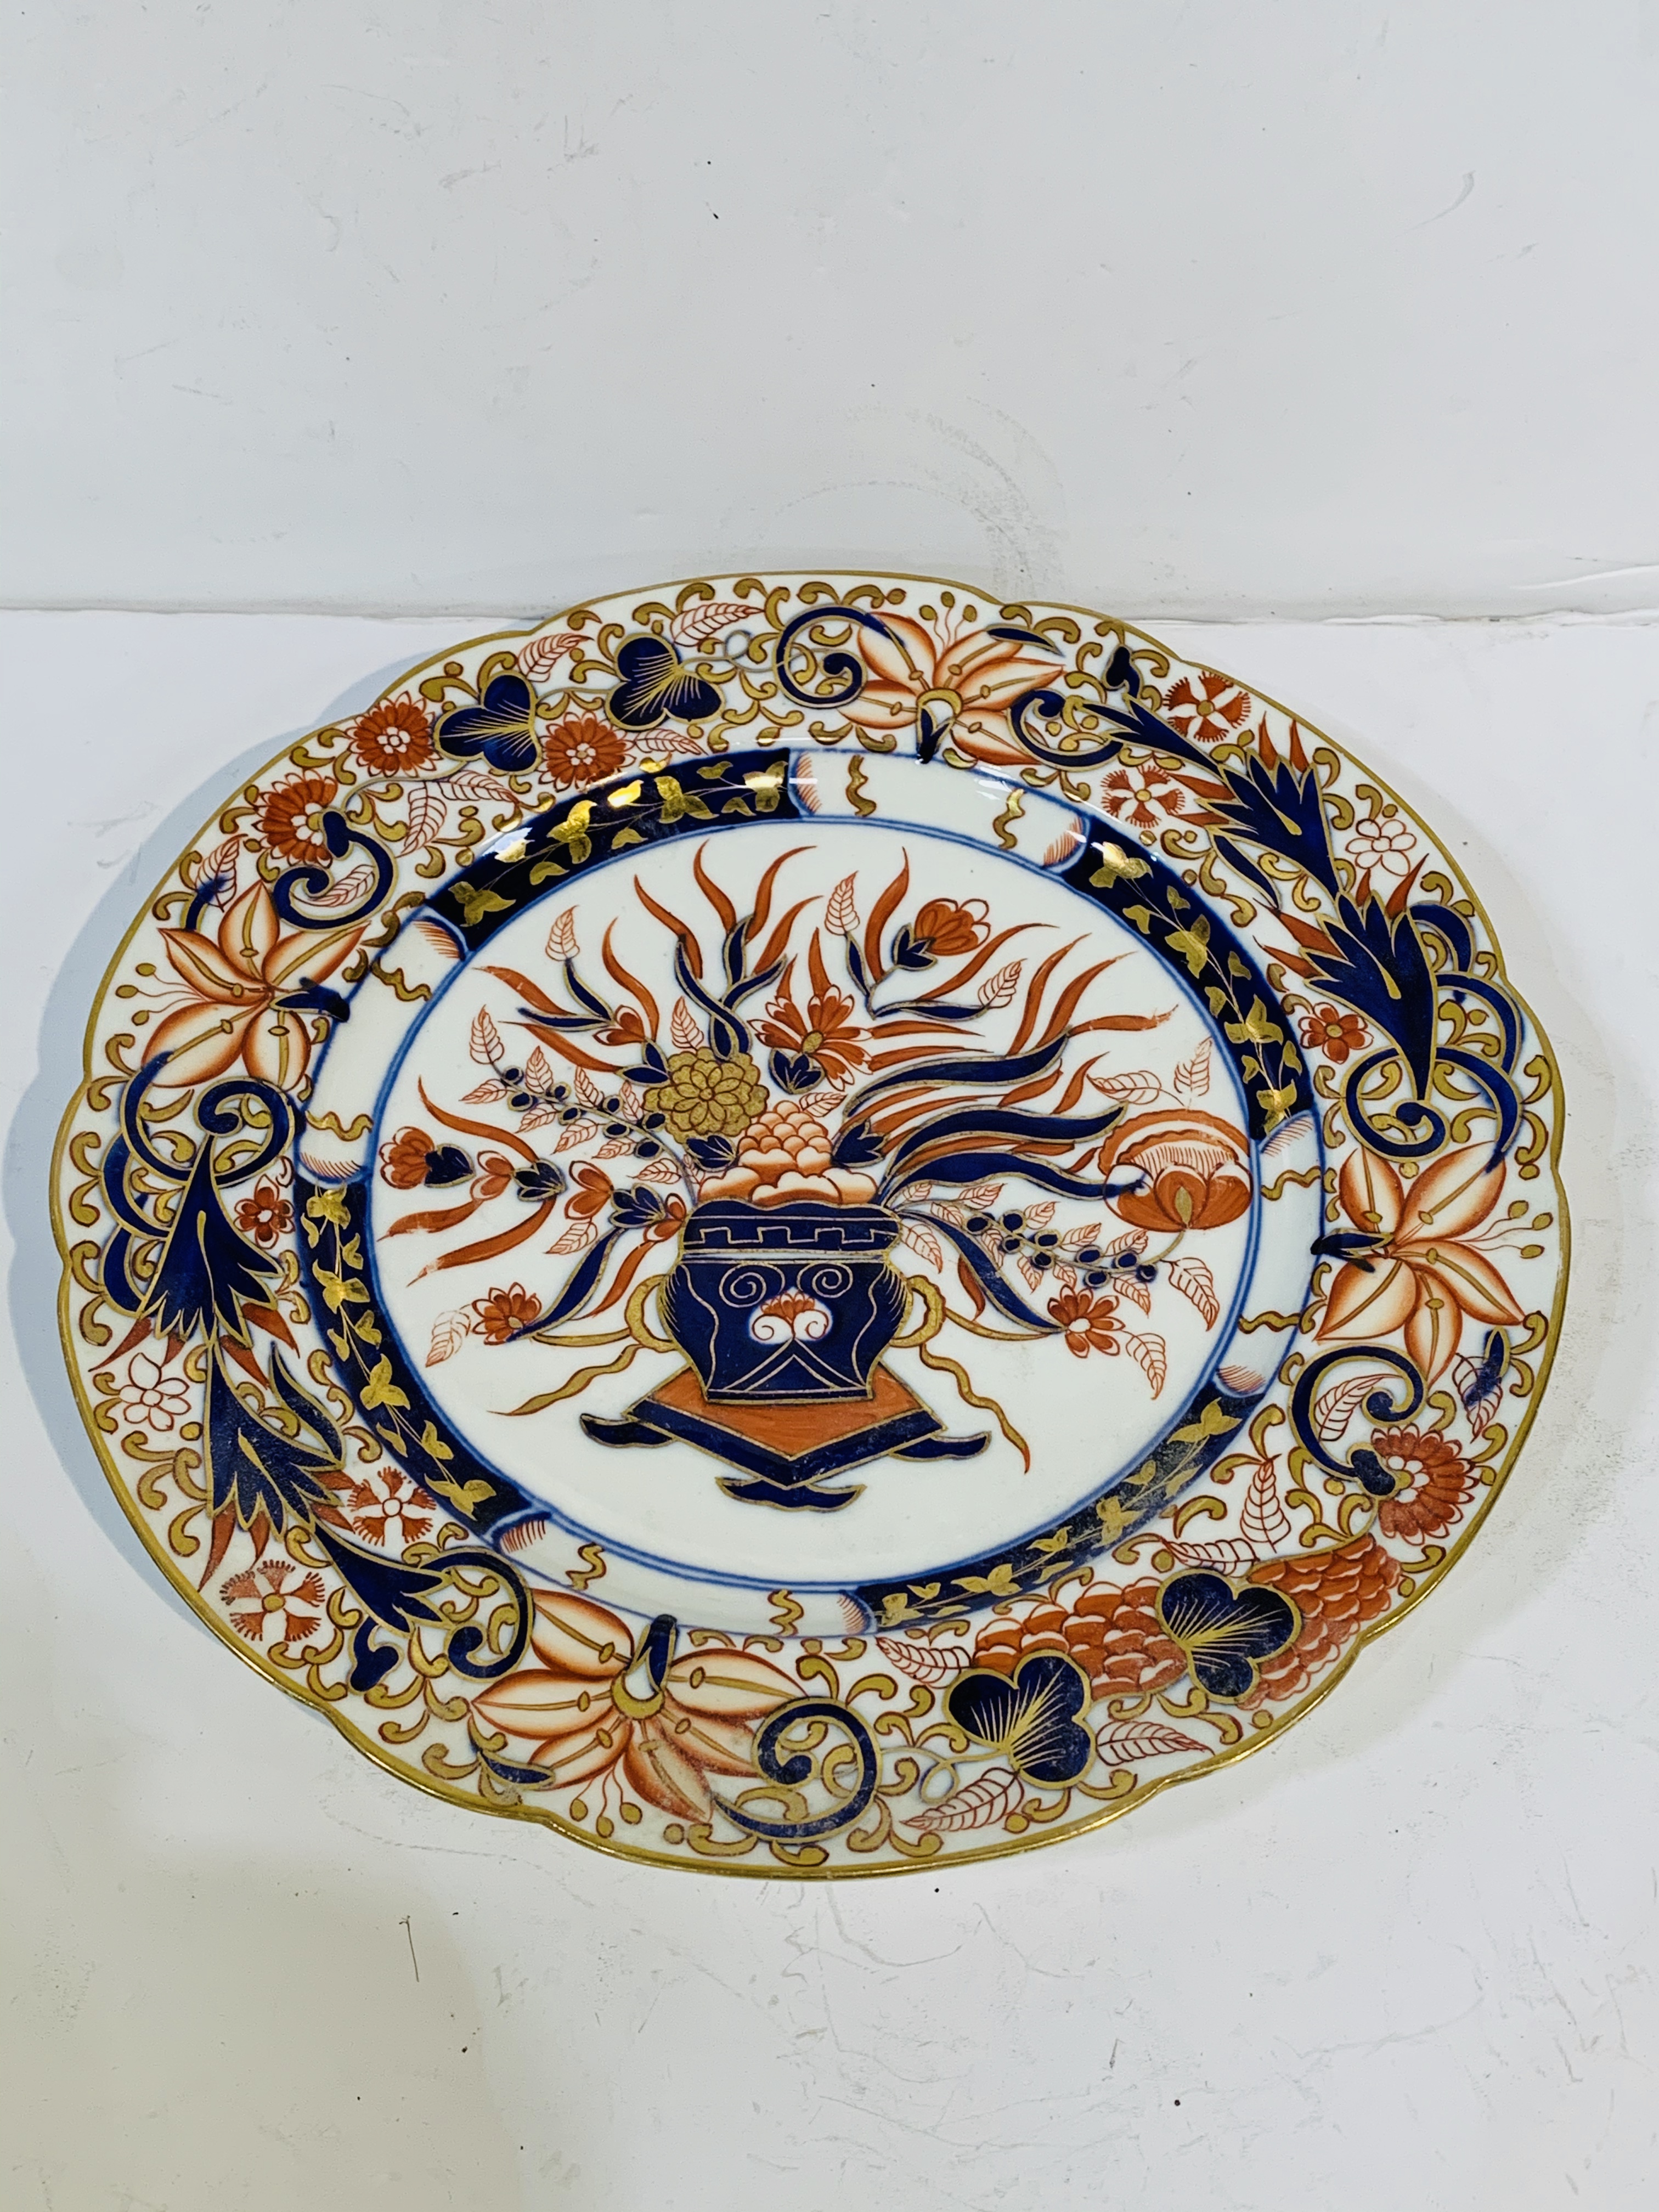 Clarice Cliff plate; red cup; blue and gold decorated plate. With a Portuguese "cabbage leaf" bowl. - Image 3 of 3